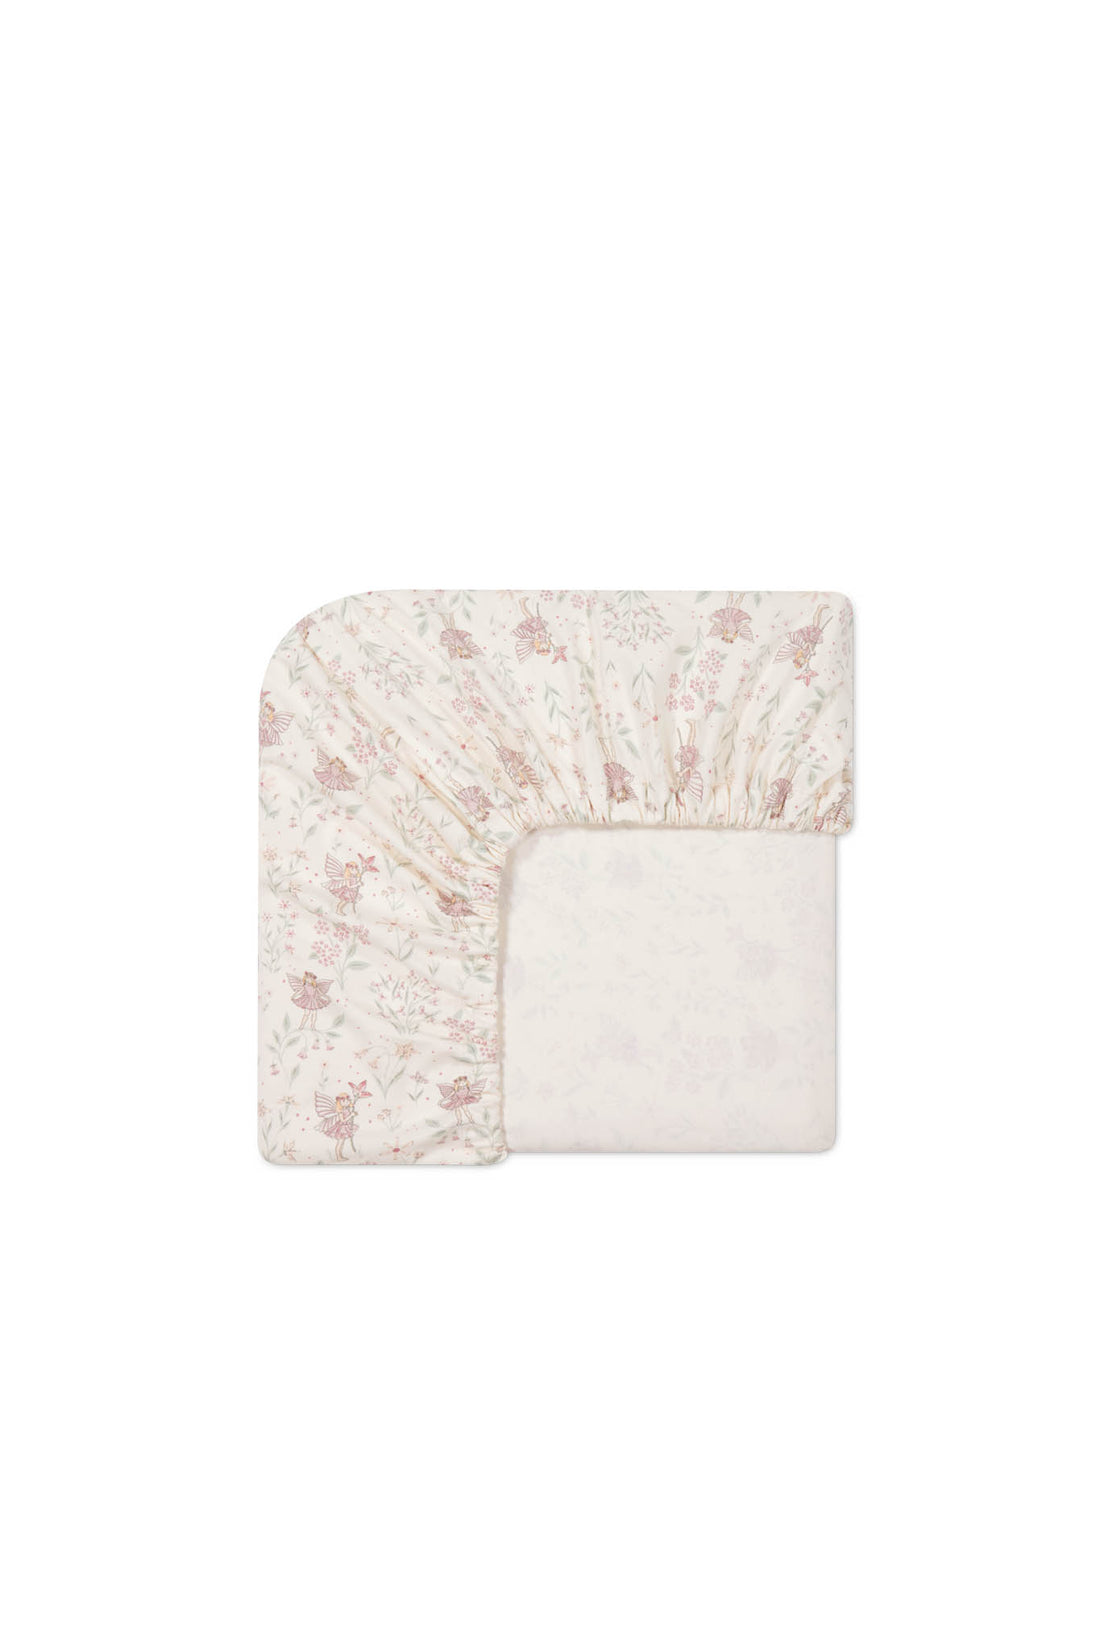 Organic Cotton Cot Sheet - Fairy Willow Childrens Cot Sheet from Jamie Kay NZ